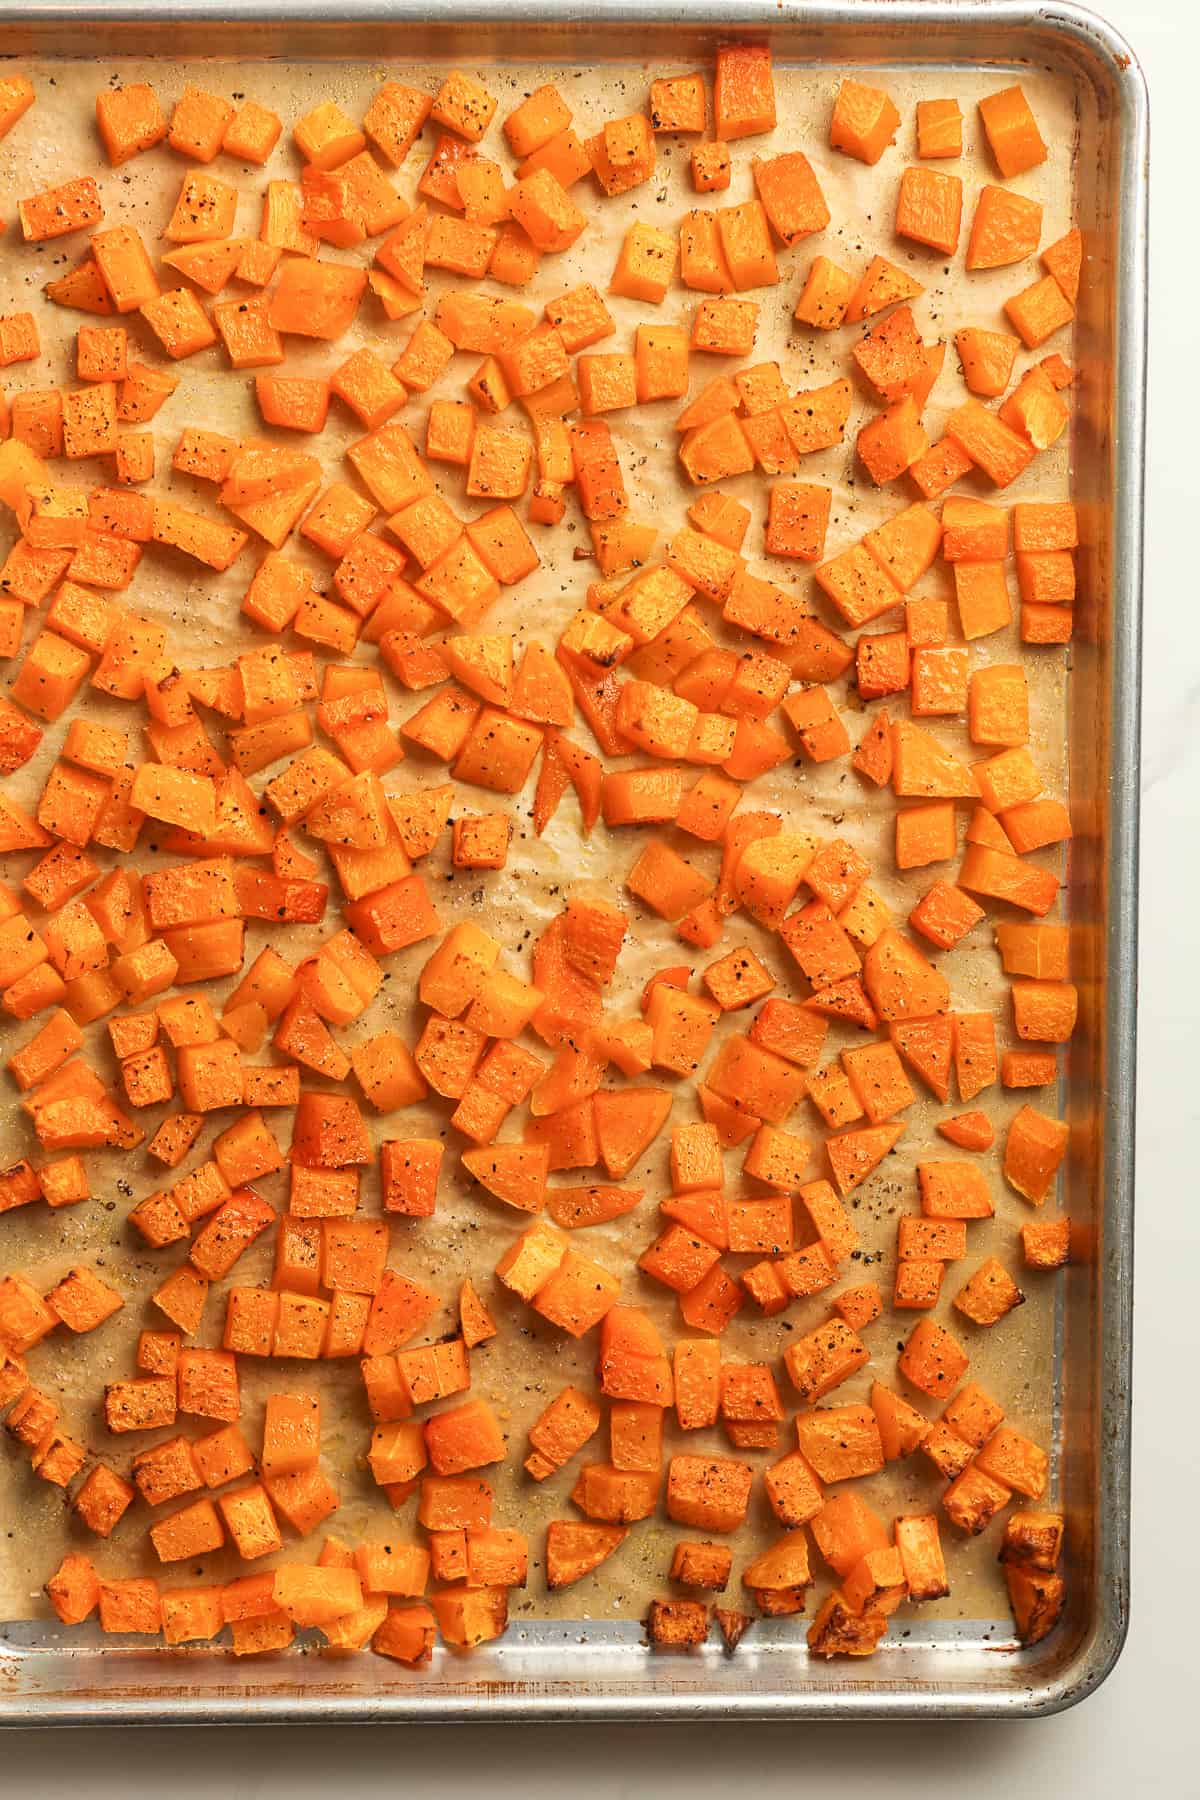 A pan of the roasted squash.